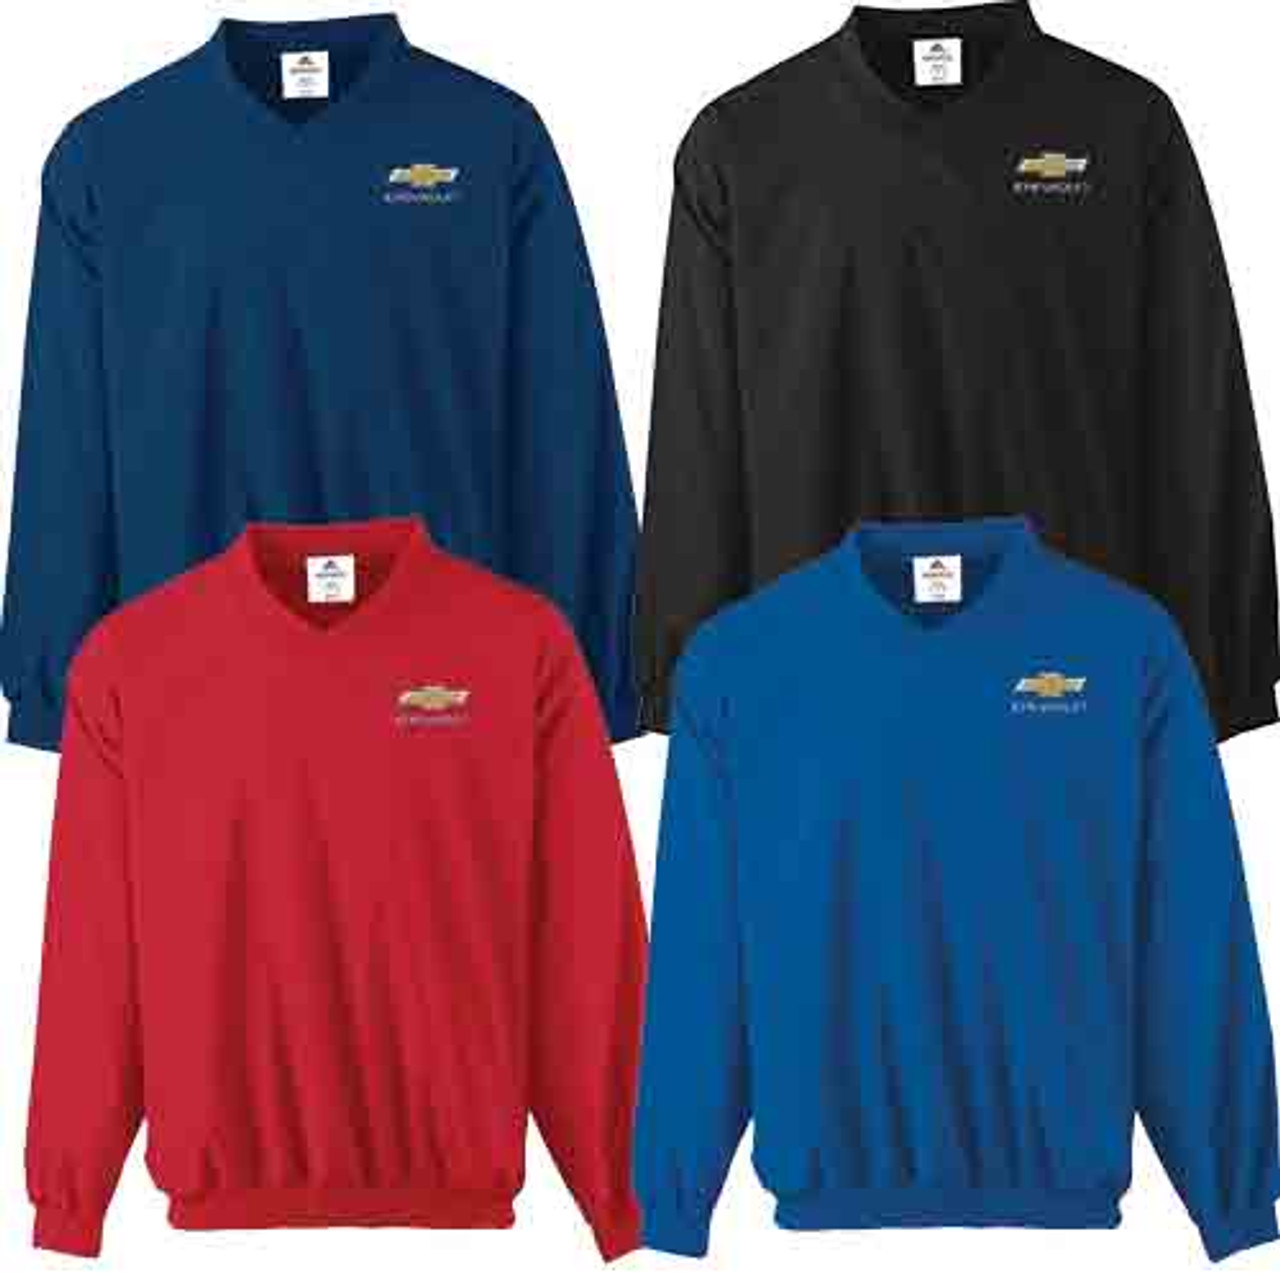 Chevrolet Gold Bowtie Micropoly Windshirt